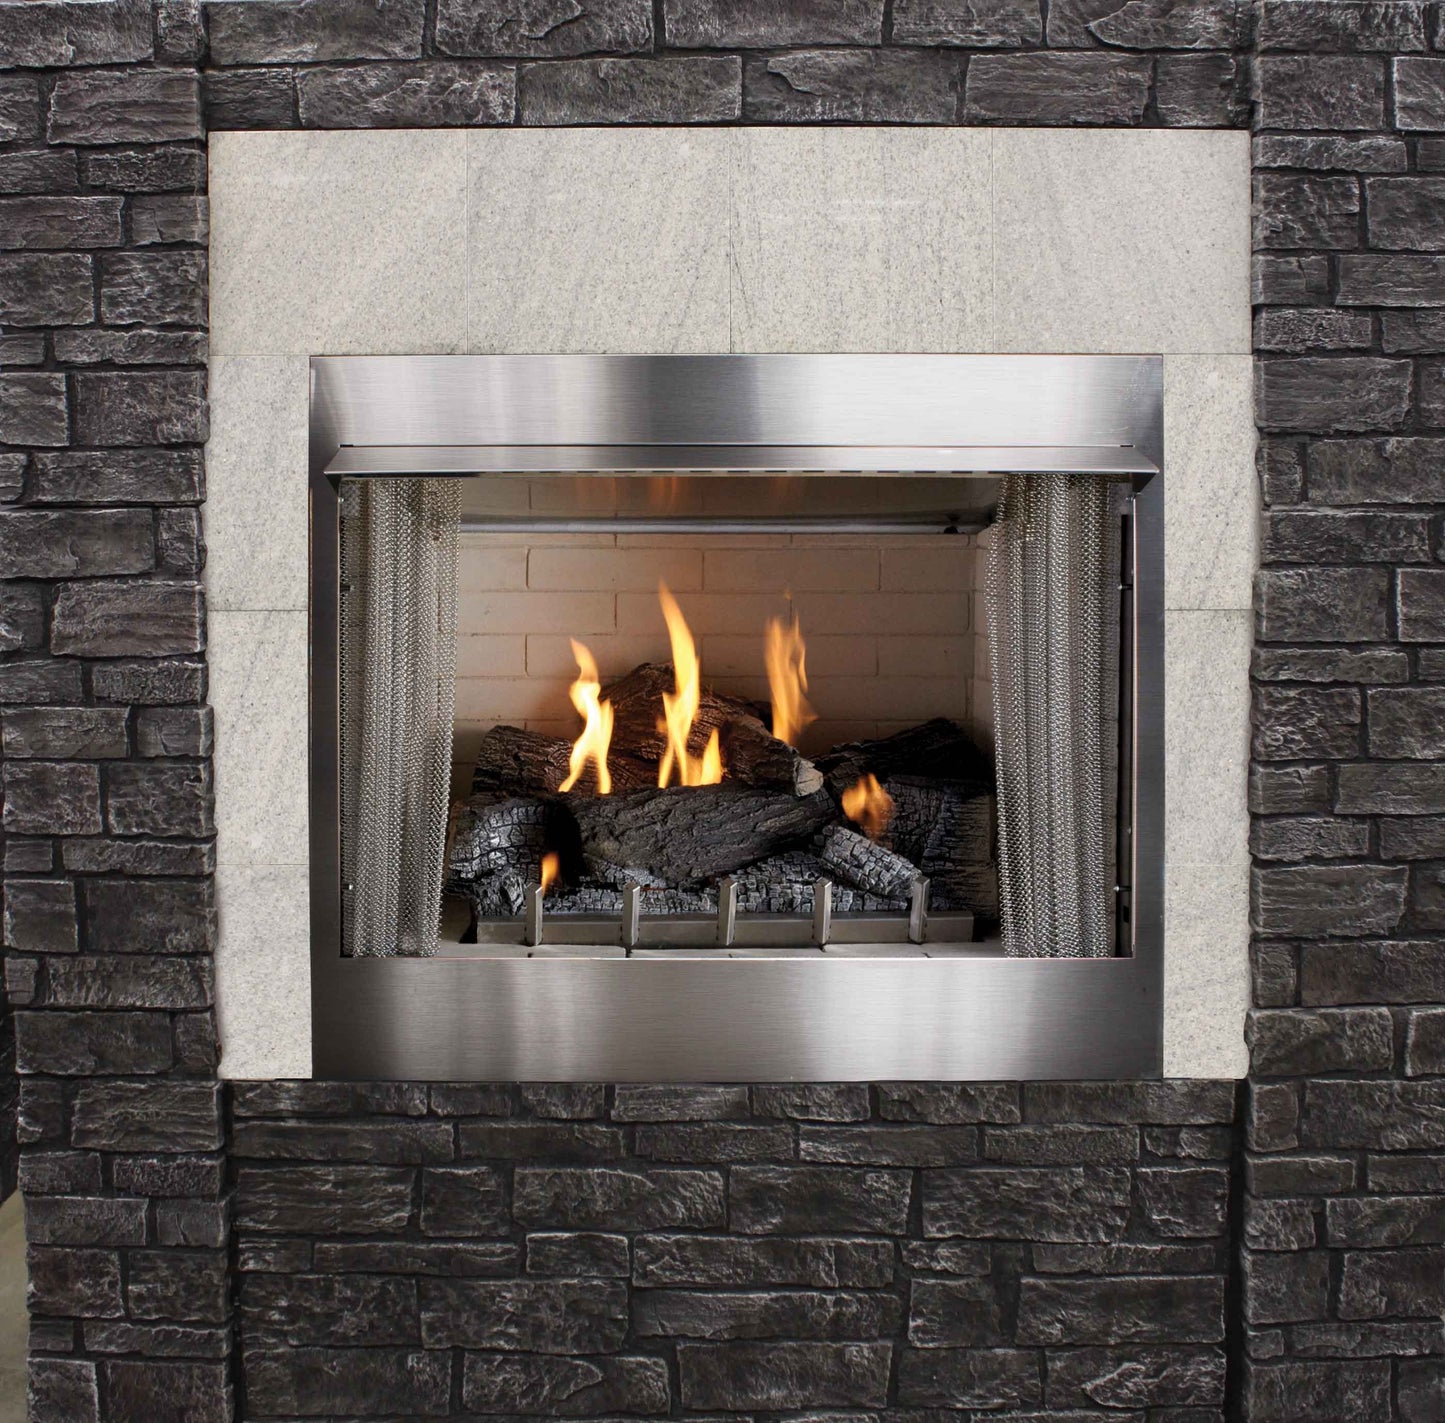 op42fp32mp/op42fp32mn 42" outdoor traditional premium fireplace millivolt with on/off switch